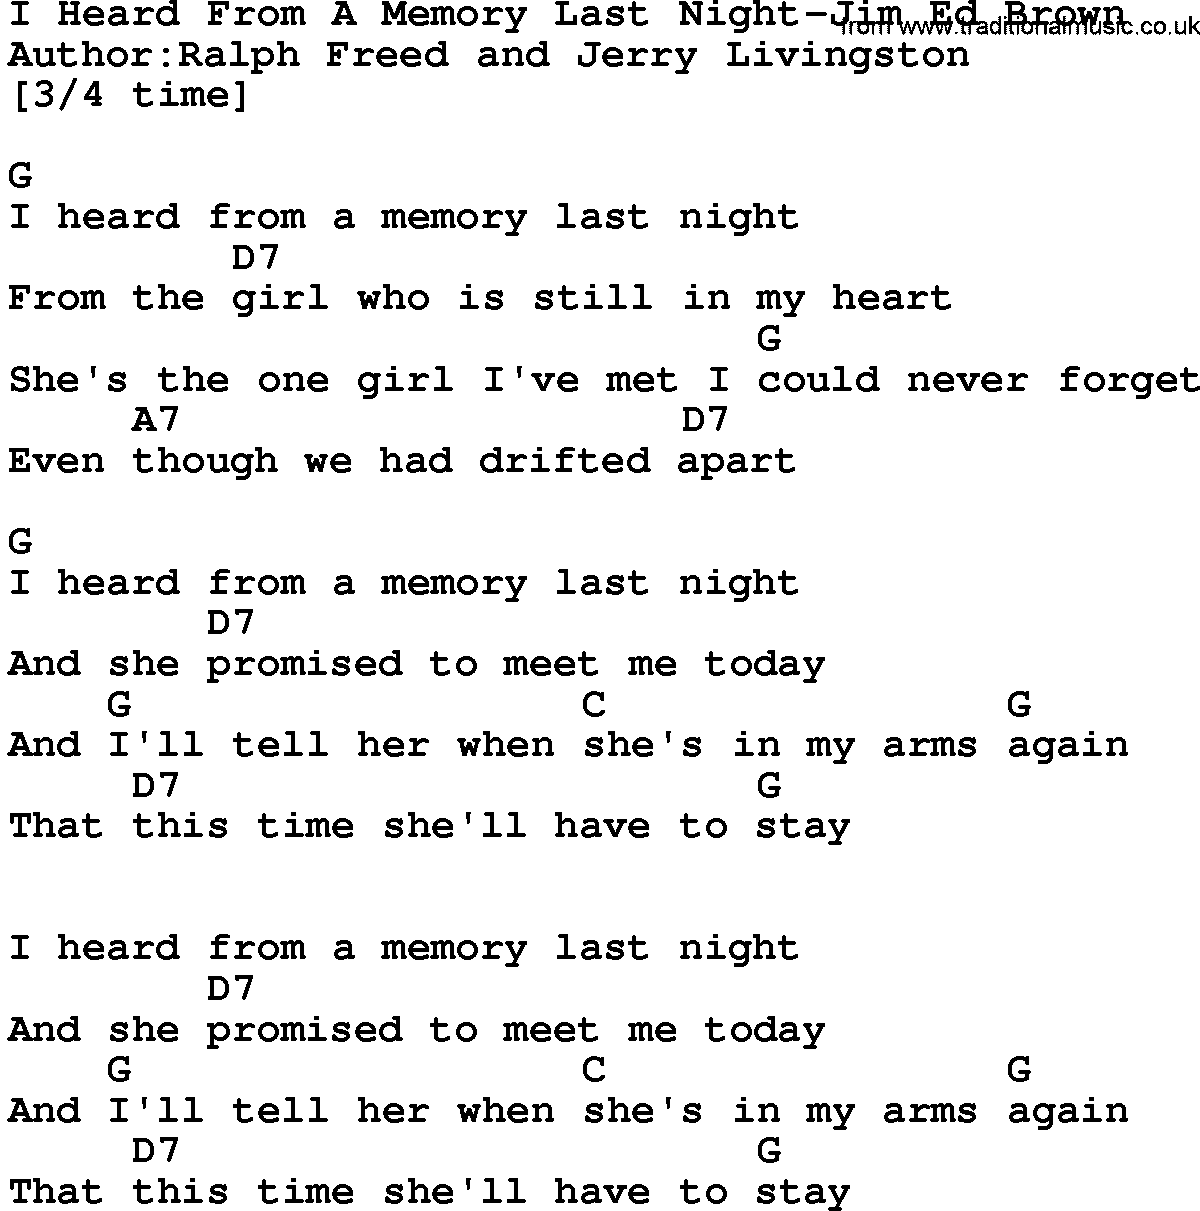 Country music song: I Heard From A Memory Last Night-Jim Ed Brown lyrics and chords